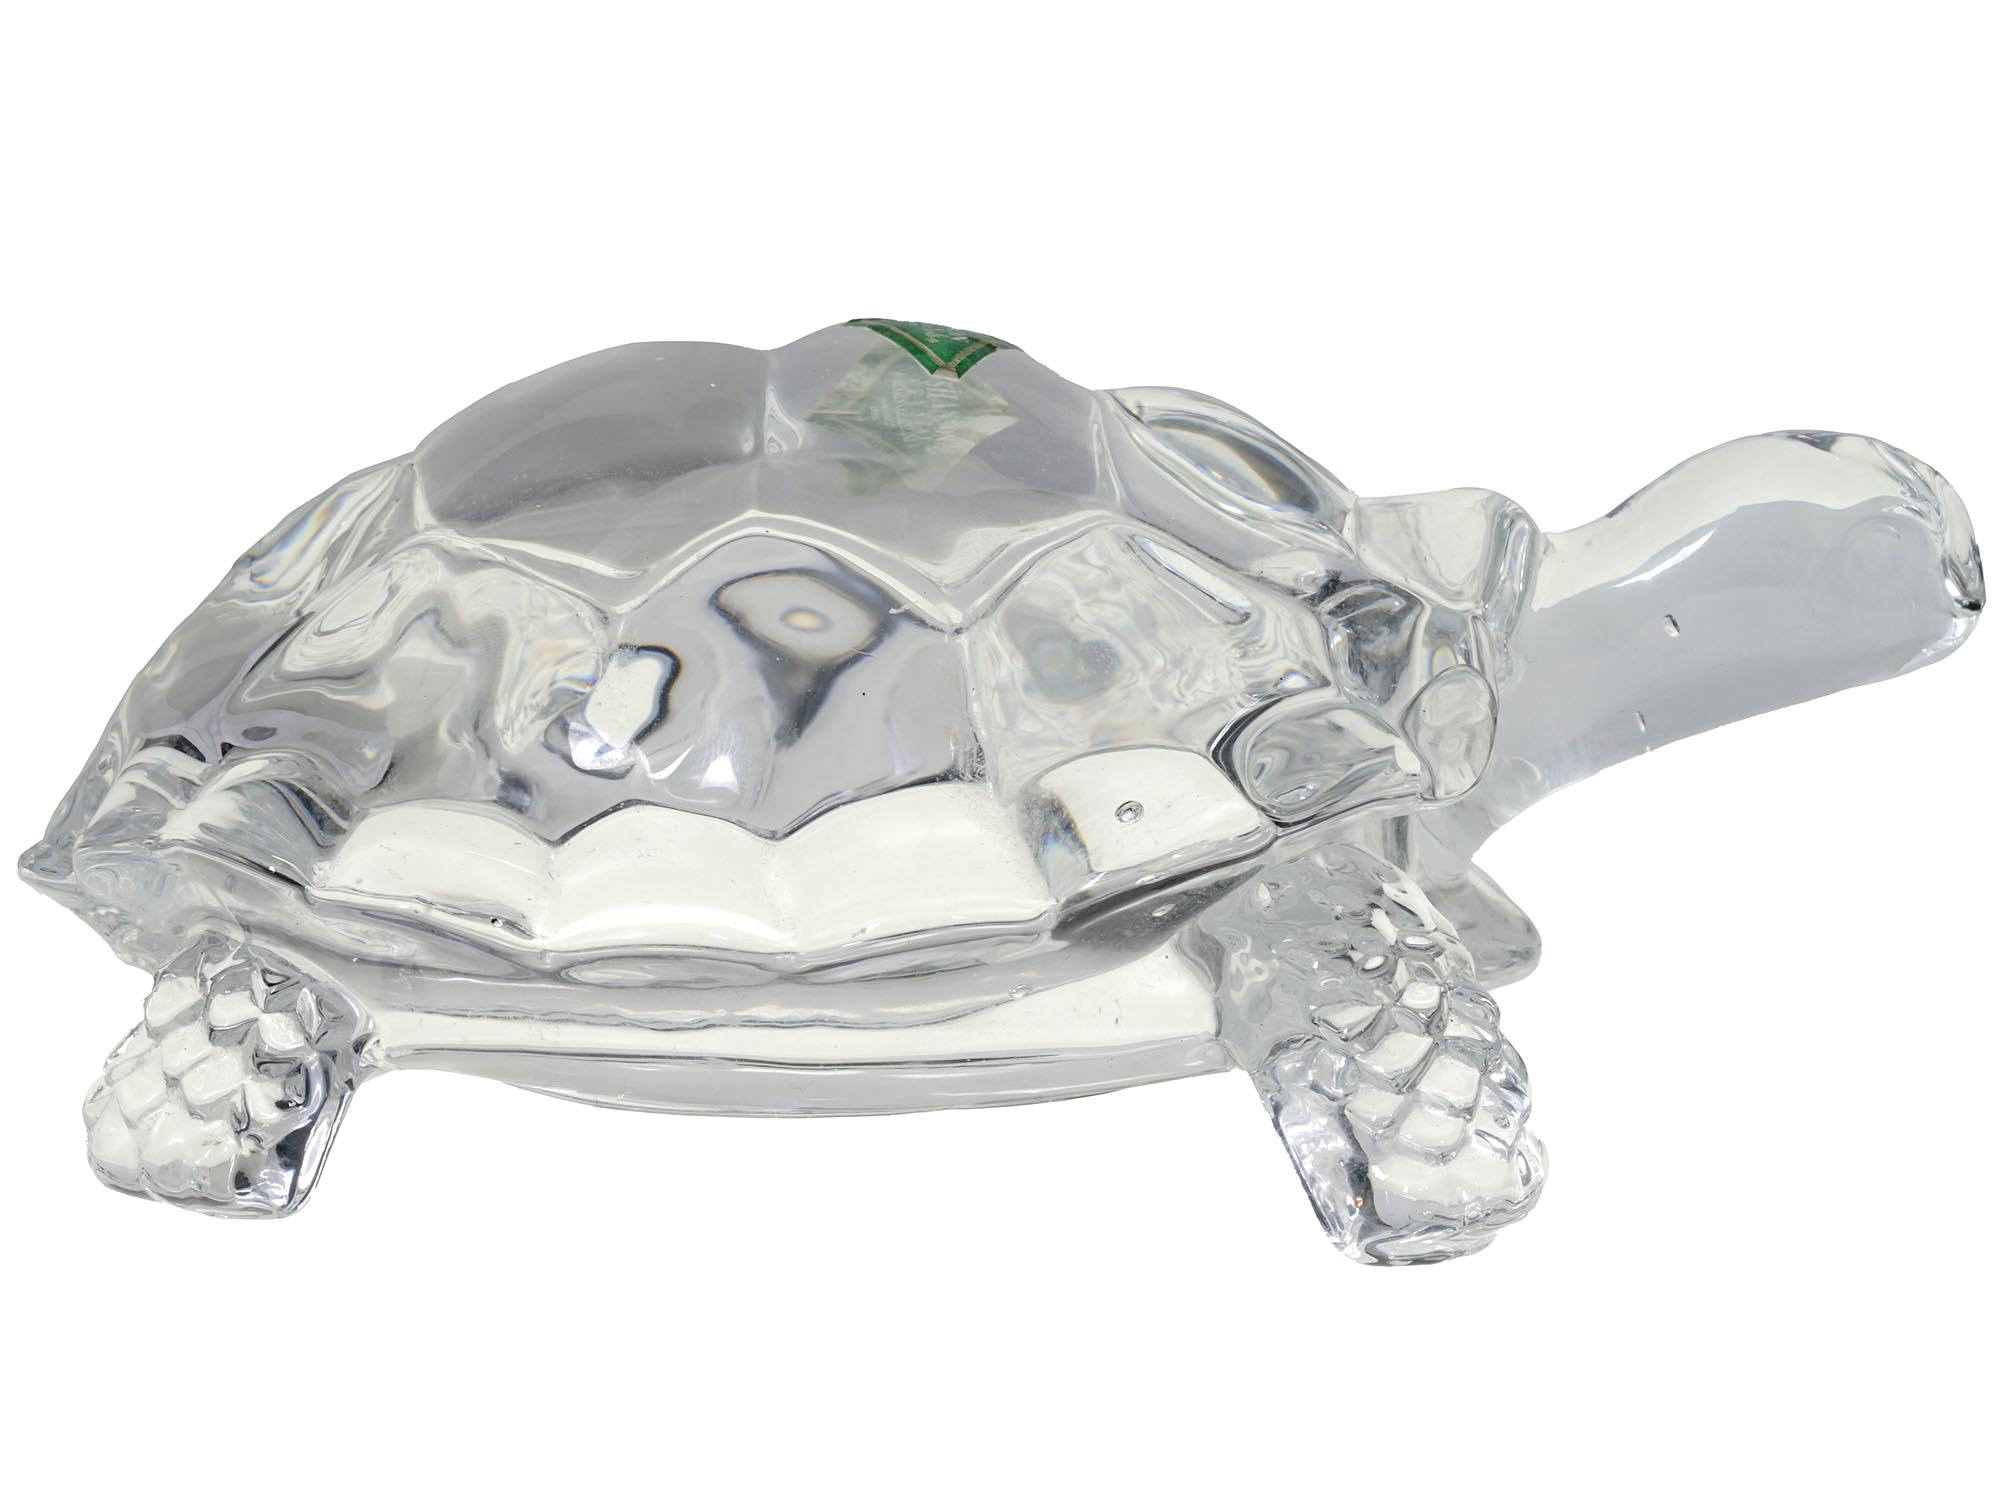 CHINESE SHANNON CRYSTAL GLASS FIGURINE OF TURTLE PIC-2